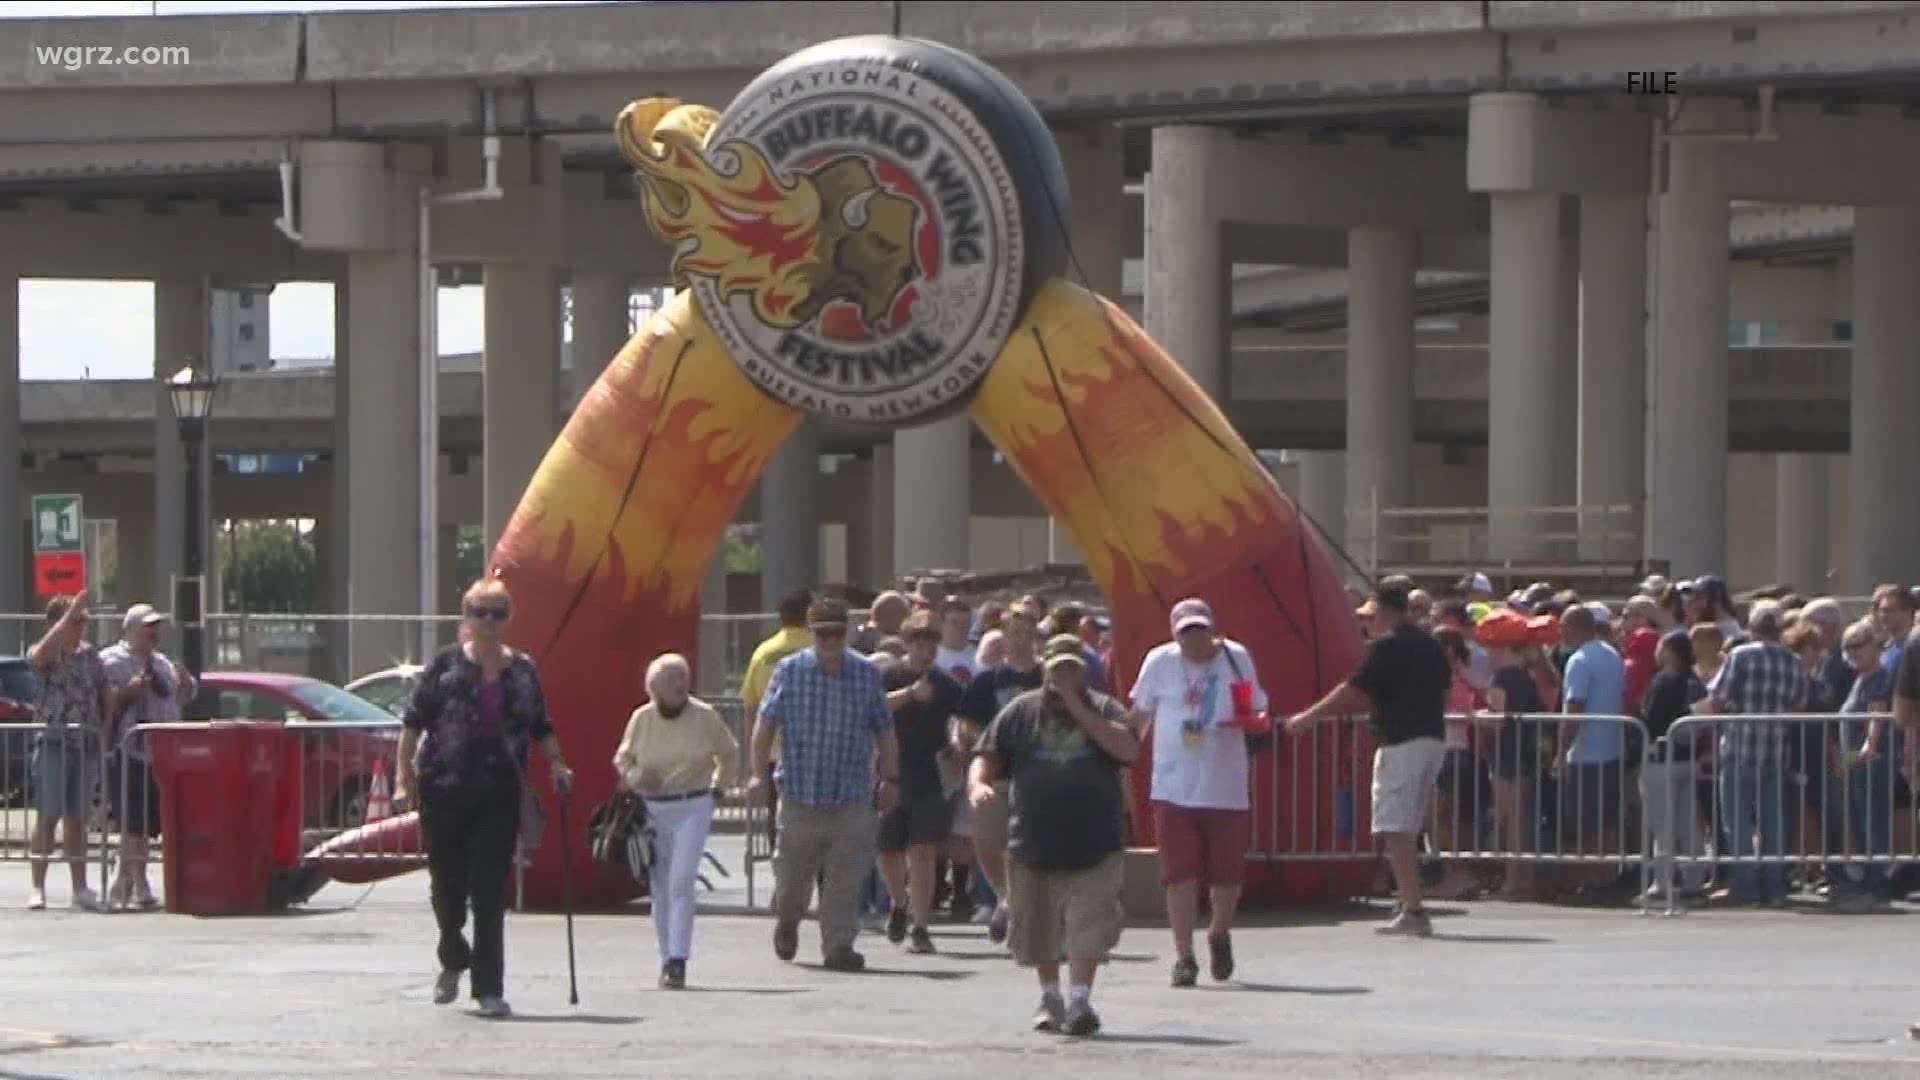 Buffalo Wing fest reimagines this year's fest